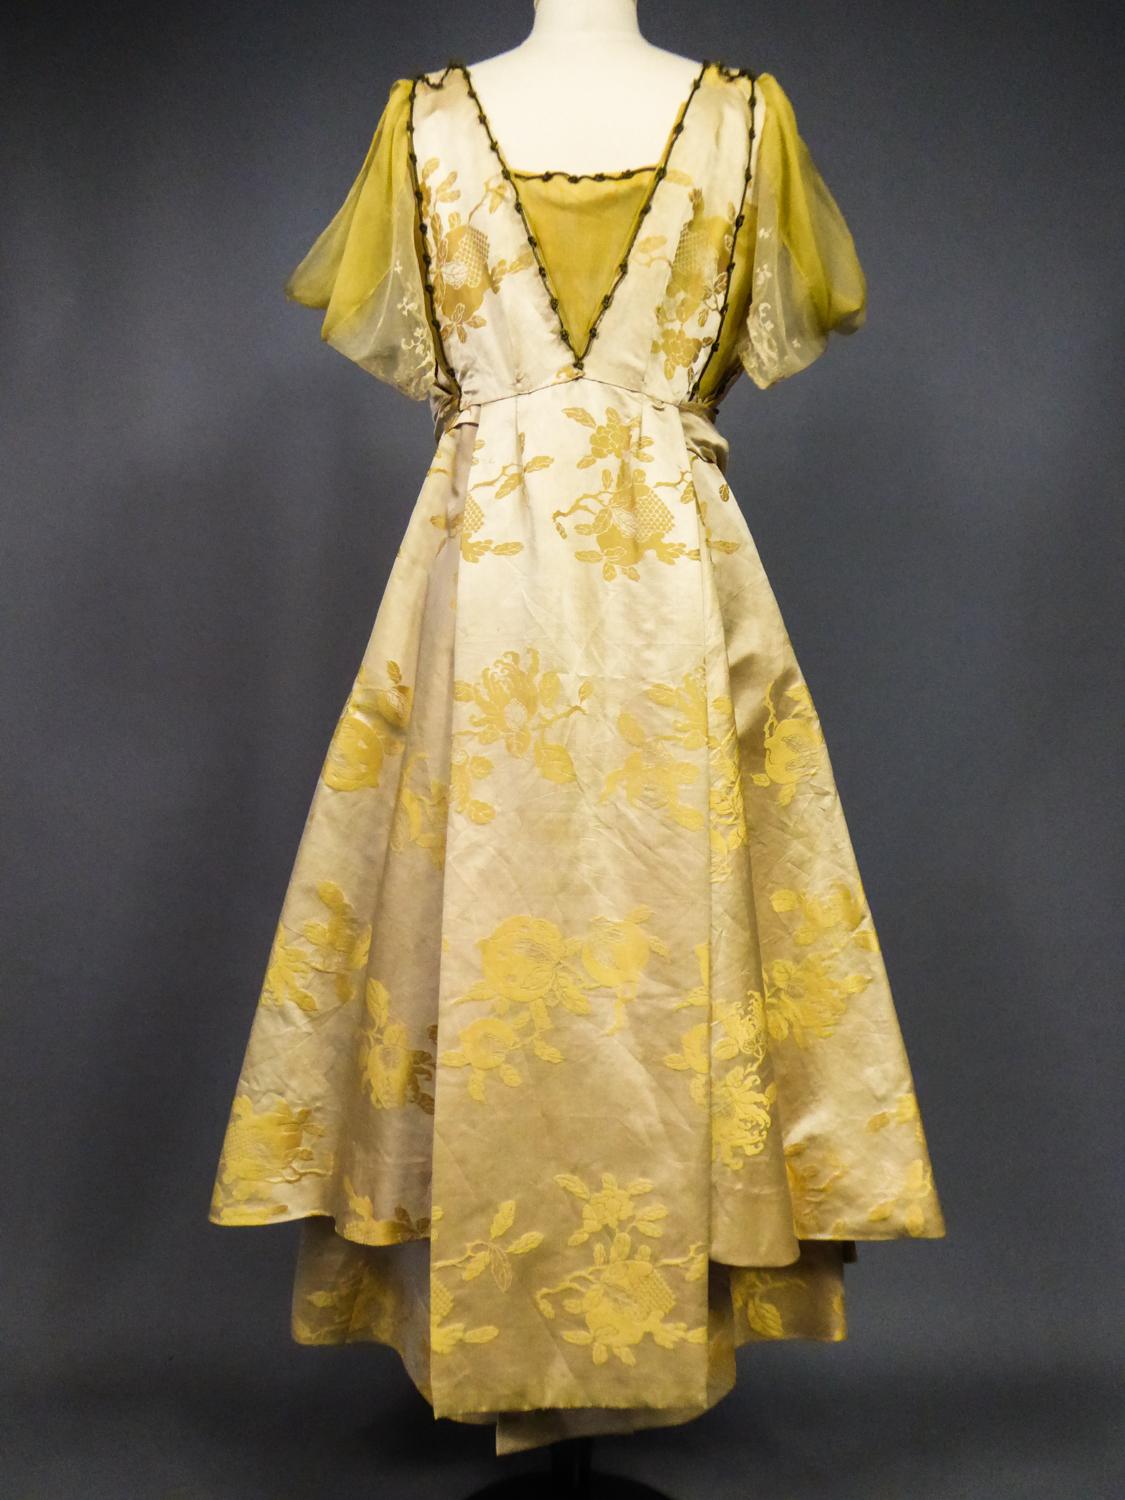 Circa 1915/1920
United States

Interesting historical testimony with this evening dress signed by Rosa C. Korn New York, Circa 1915. Pale yellow and gold damask satin from China, pale sleeves in yellow silk crepe adorned with lace. Elaborate cut